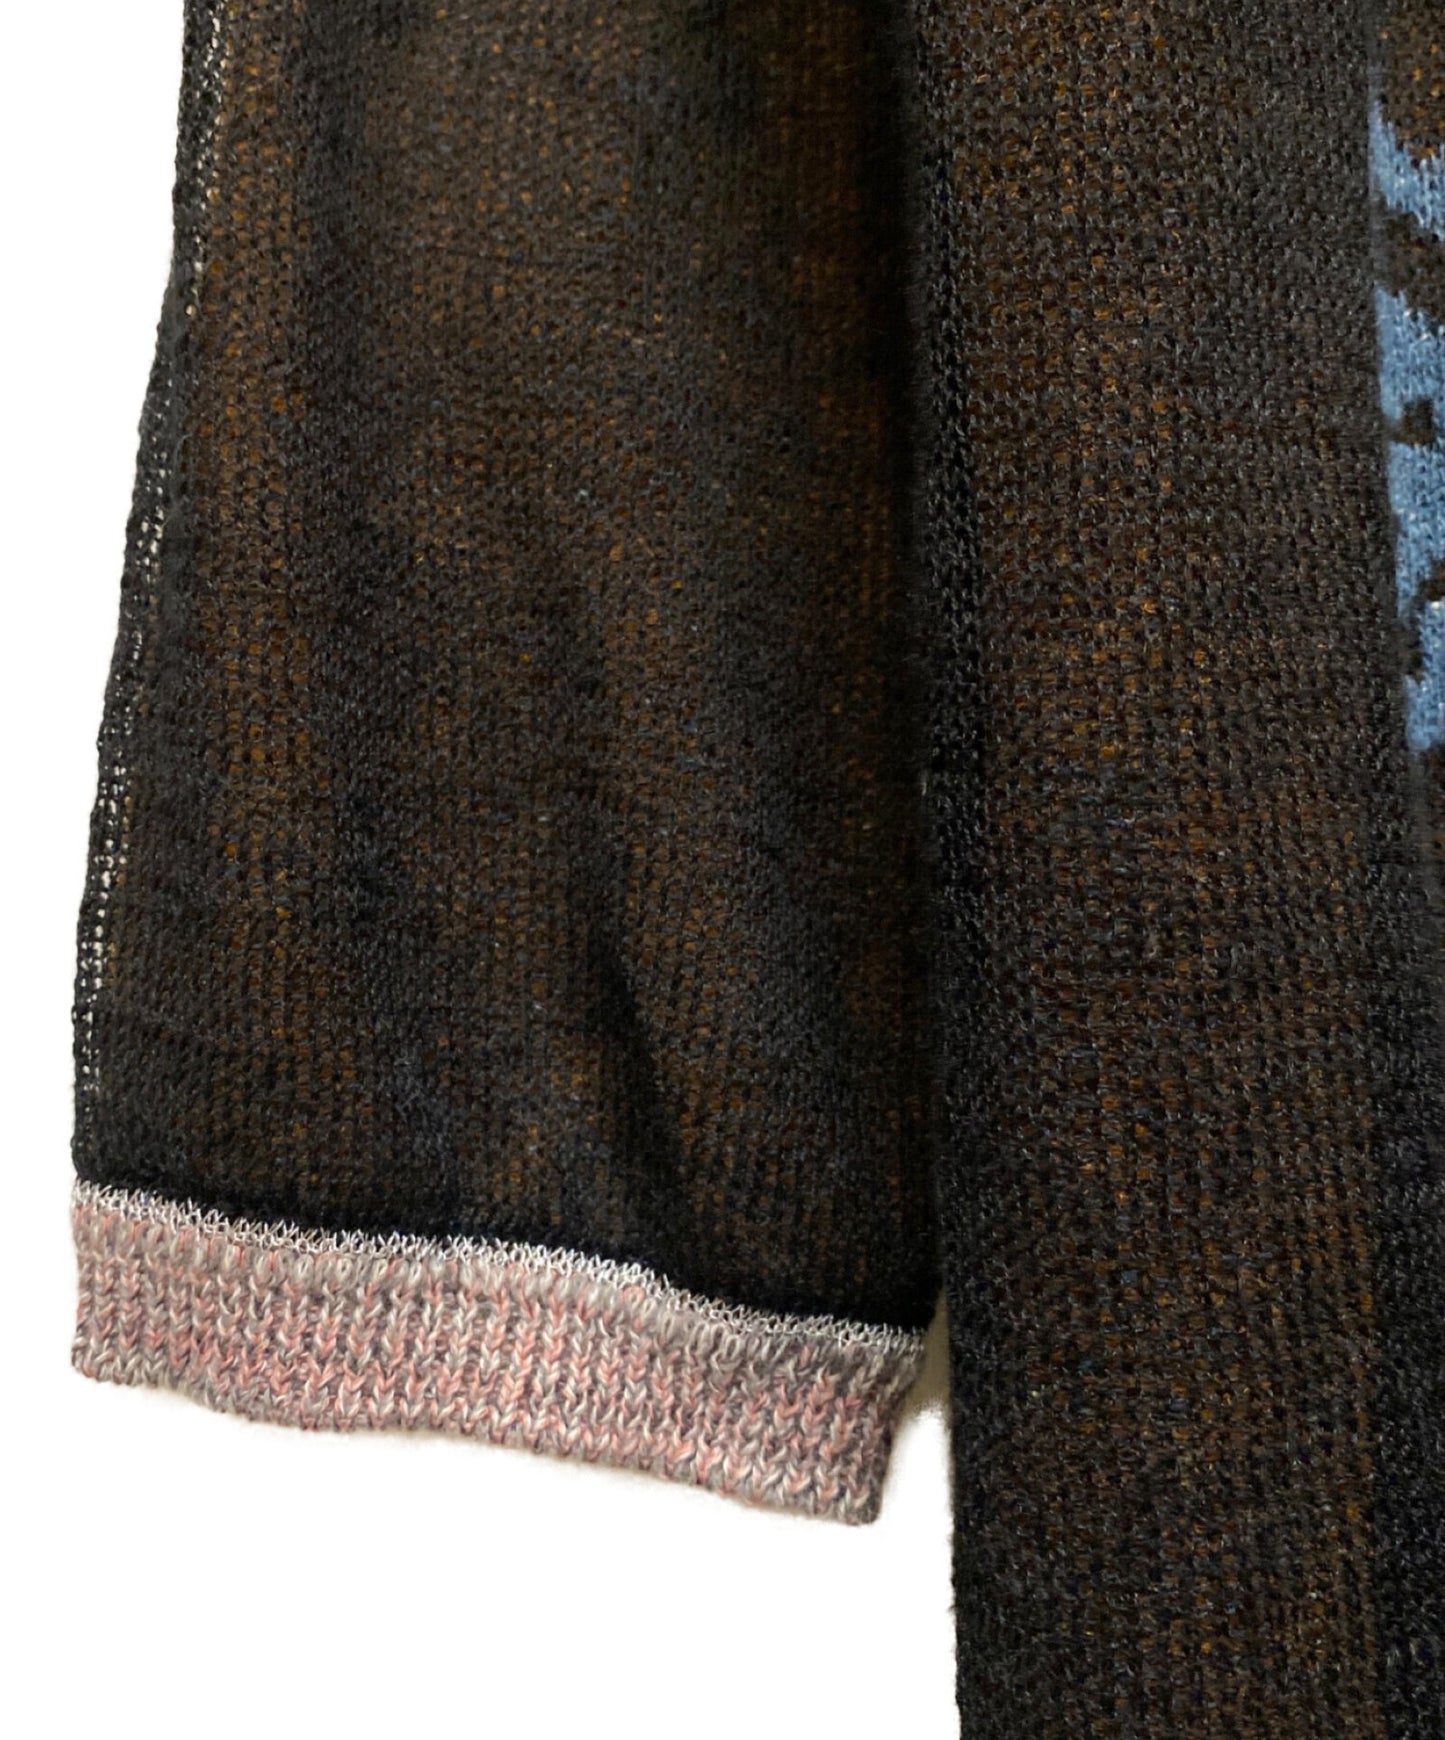 [Pre-owned] Yohji Yamamoto pour homme 22SS 7G MESSAGE JACQUARD PRIZE HOME TOWN LONG SLEEVES HG-K13-373